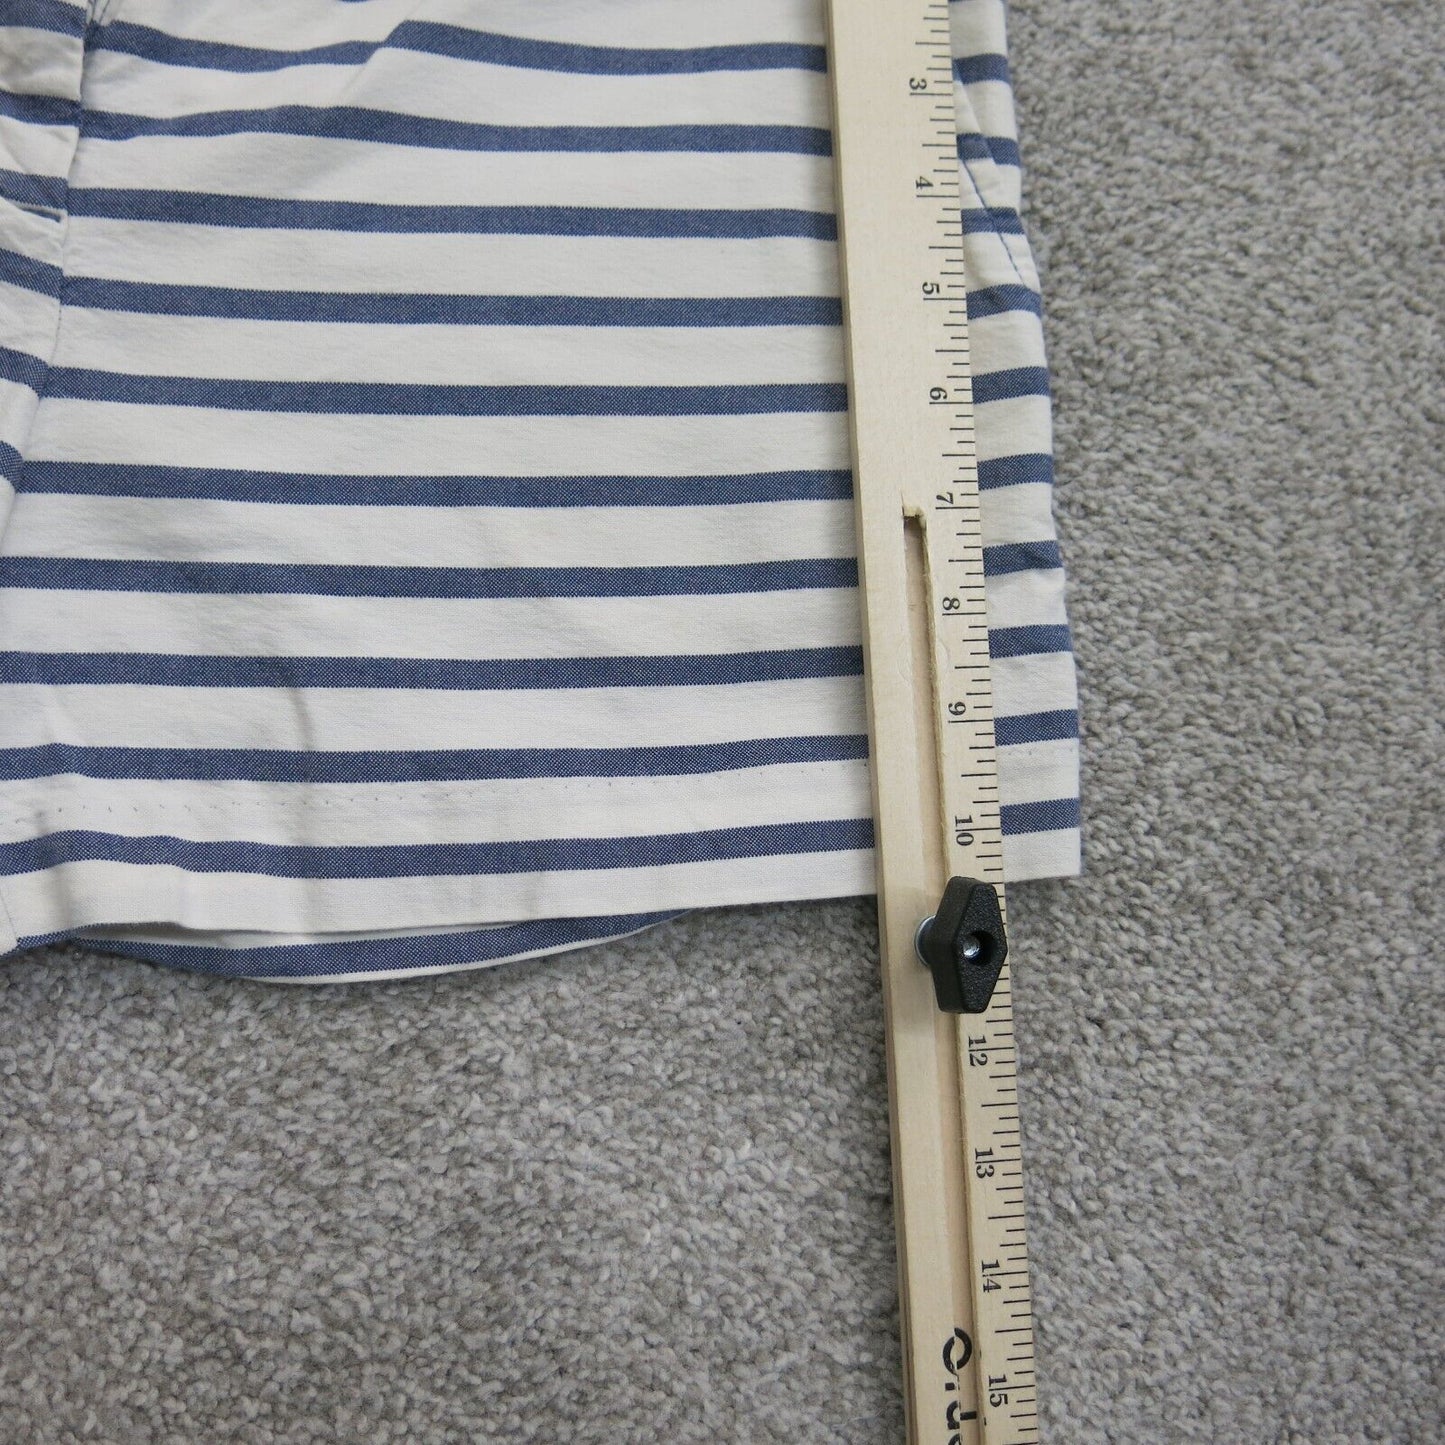 Gap Womens Striped Chino Shorts Mid Rise Flat Front Pockets White Blue Size 8